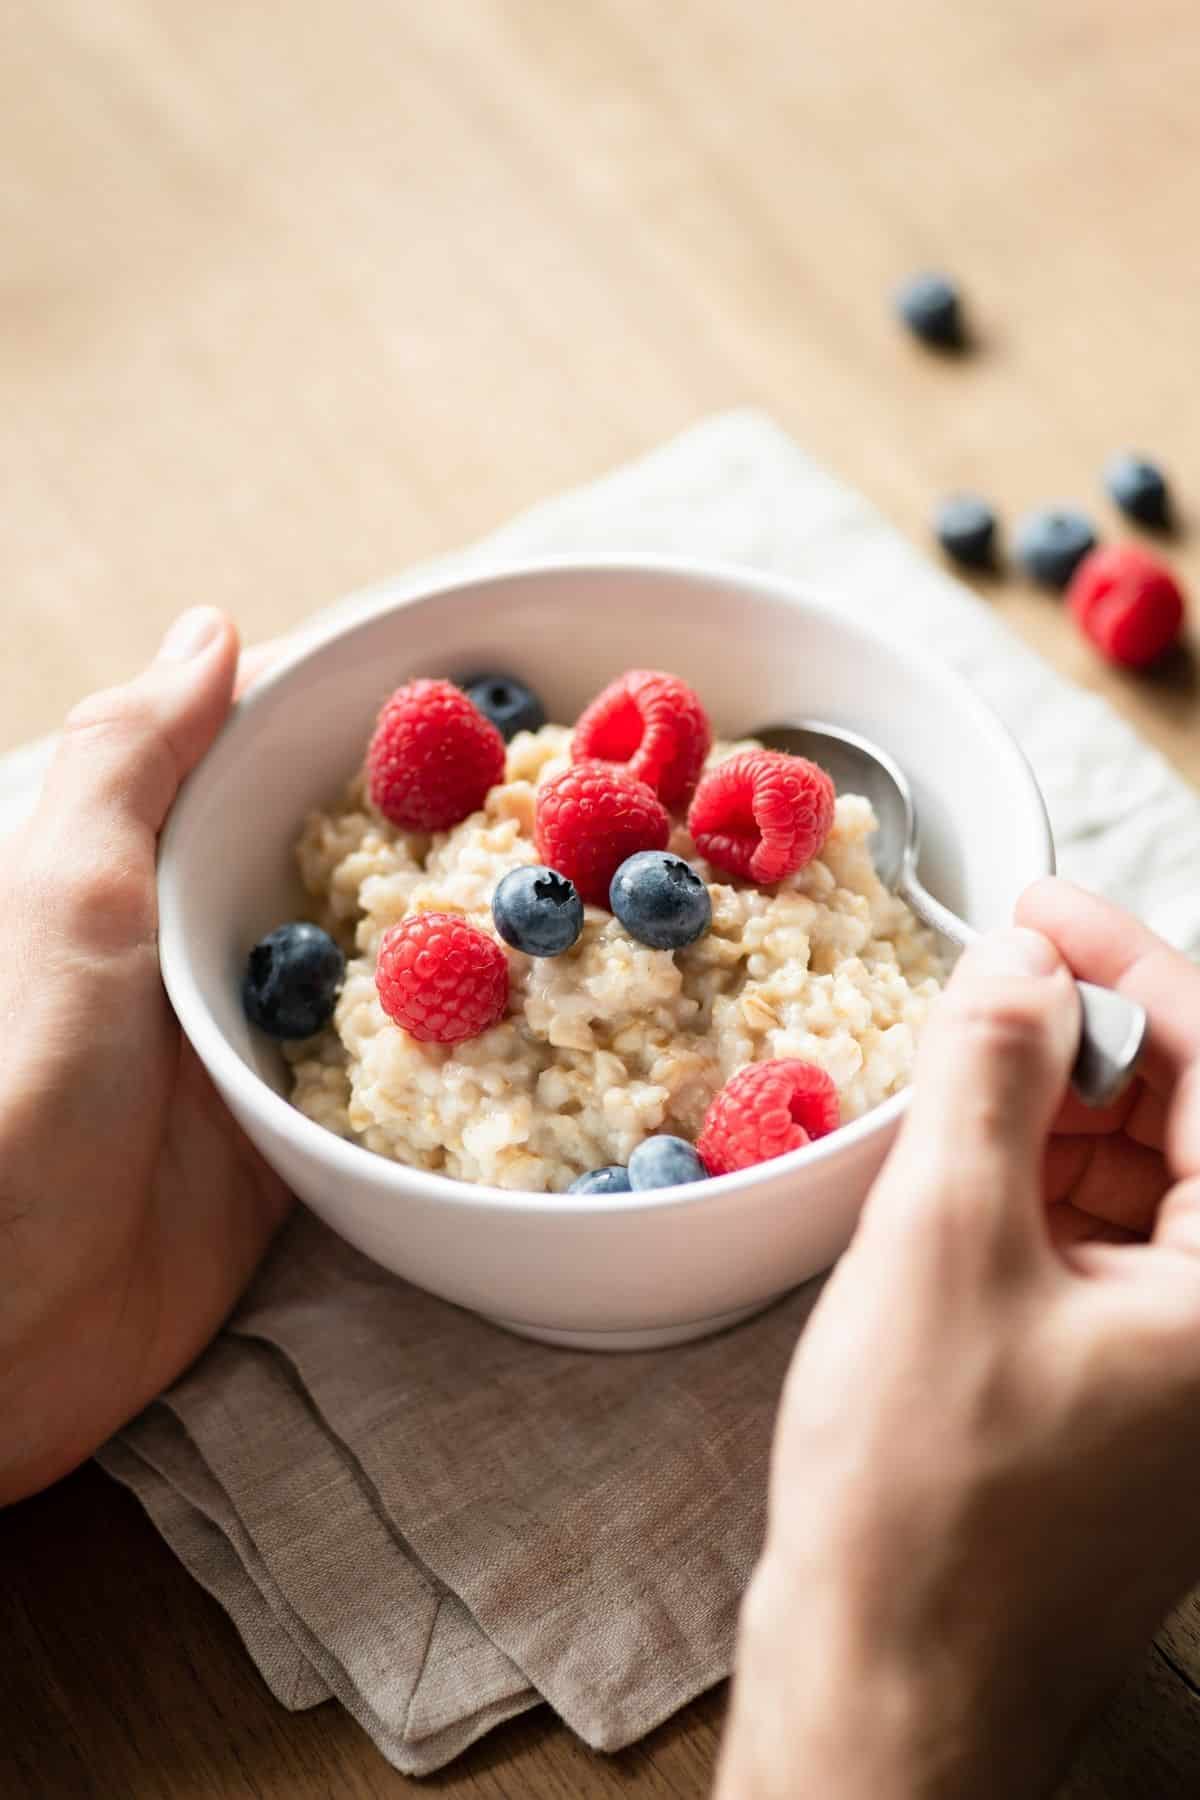 A bowl of oatmeal with berries on it.